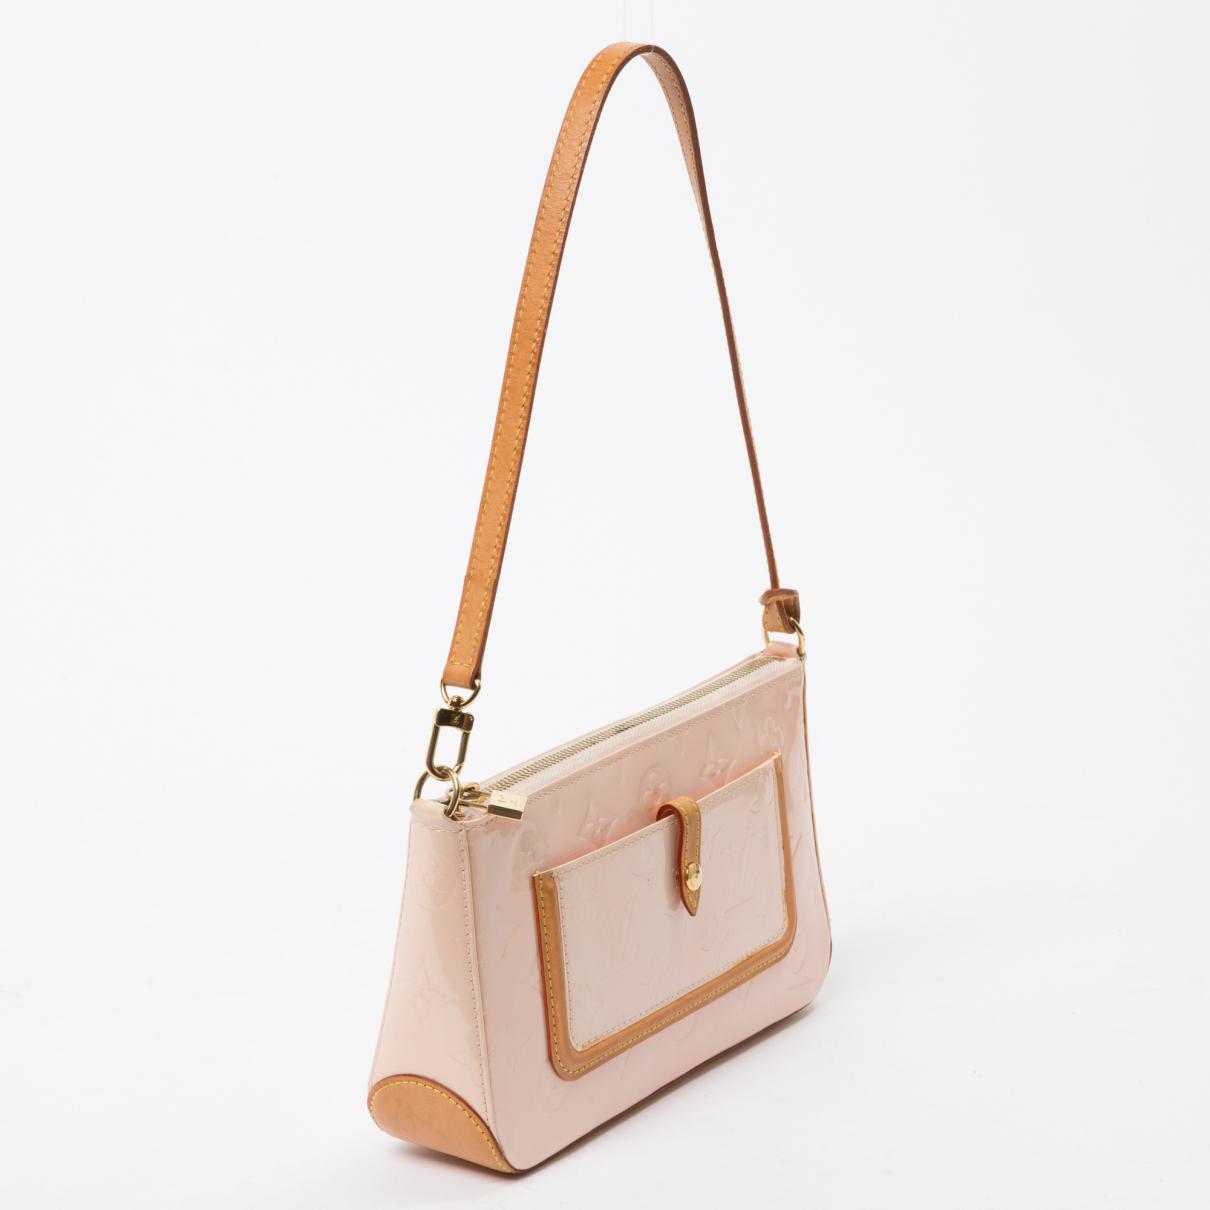 Louis Vuitton Patent Leather Mini Bag in Pink - Lyst